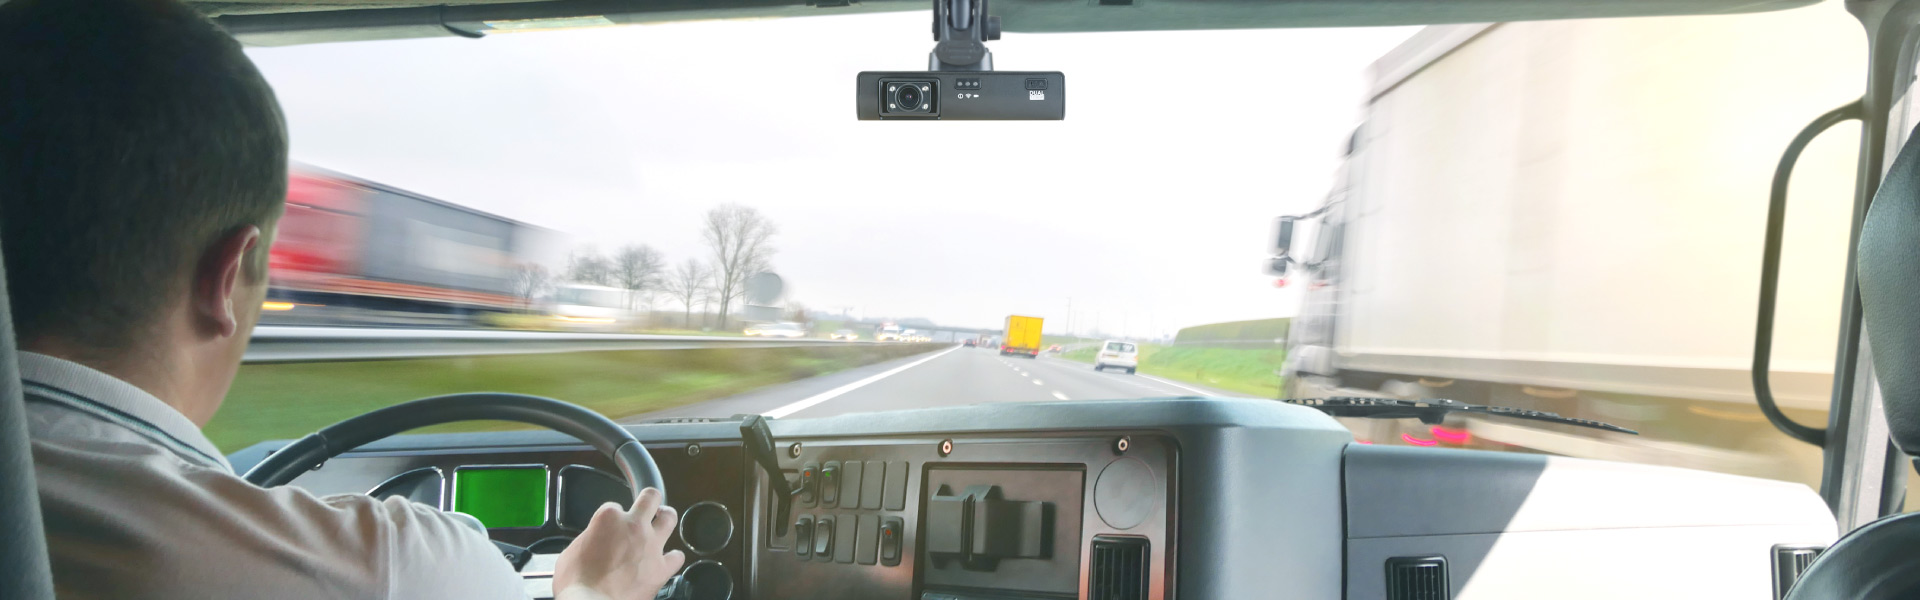 Five Benefits of Video Telematics Systems for Trucking Operators